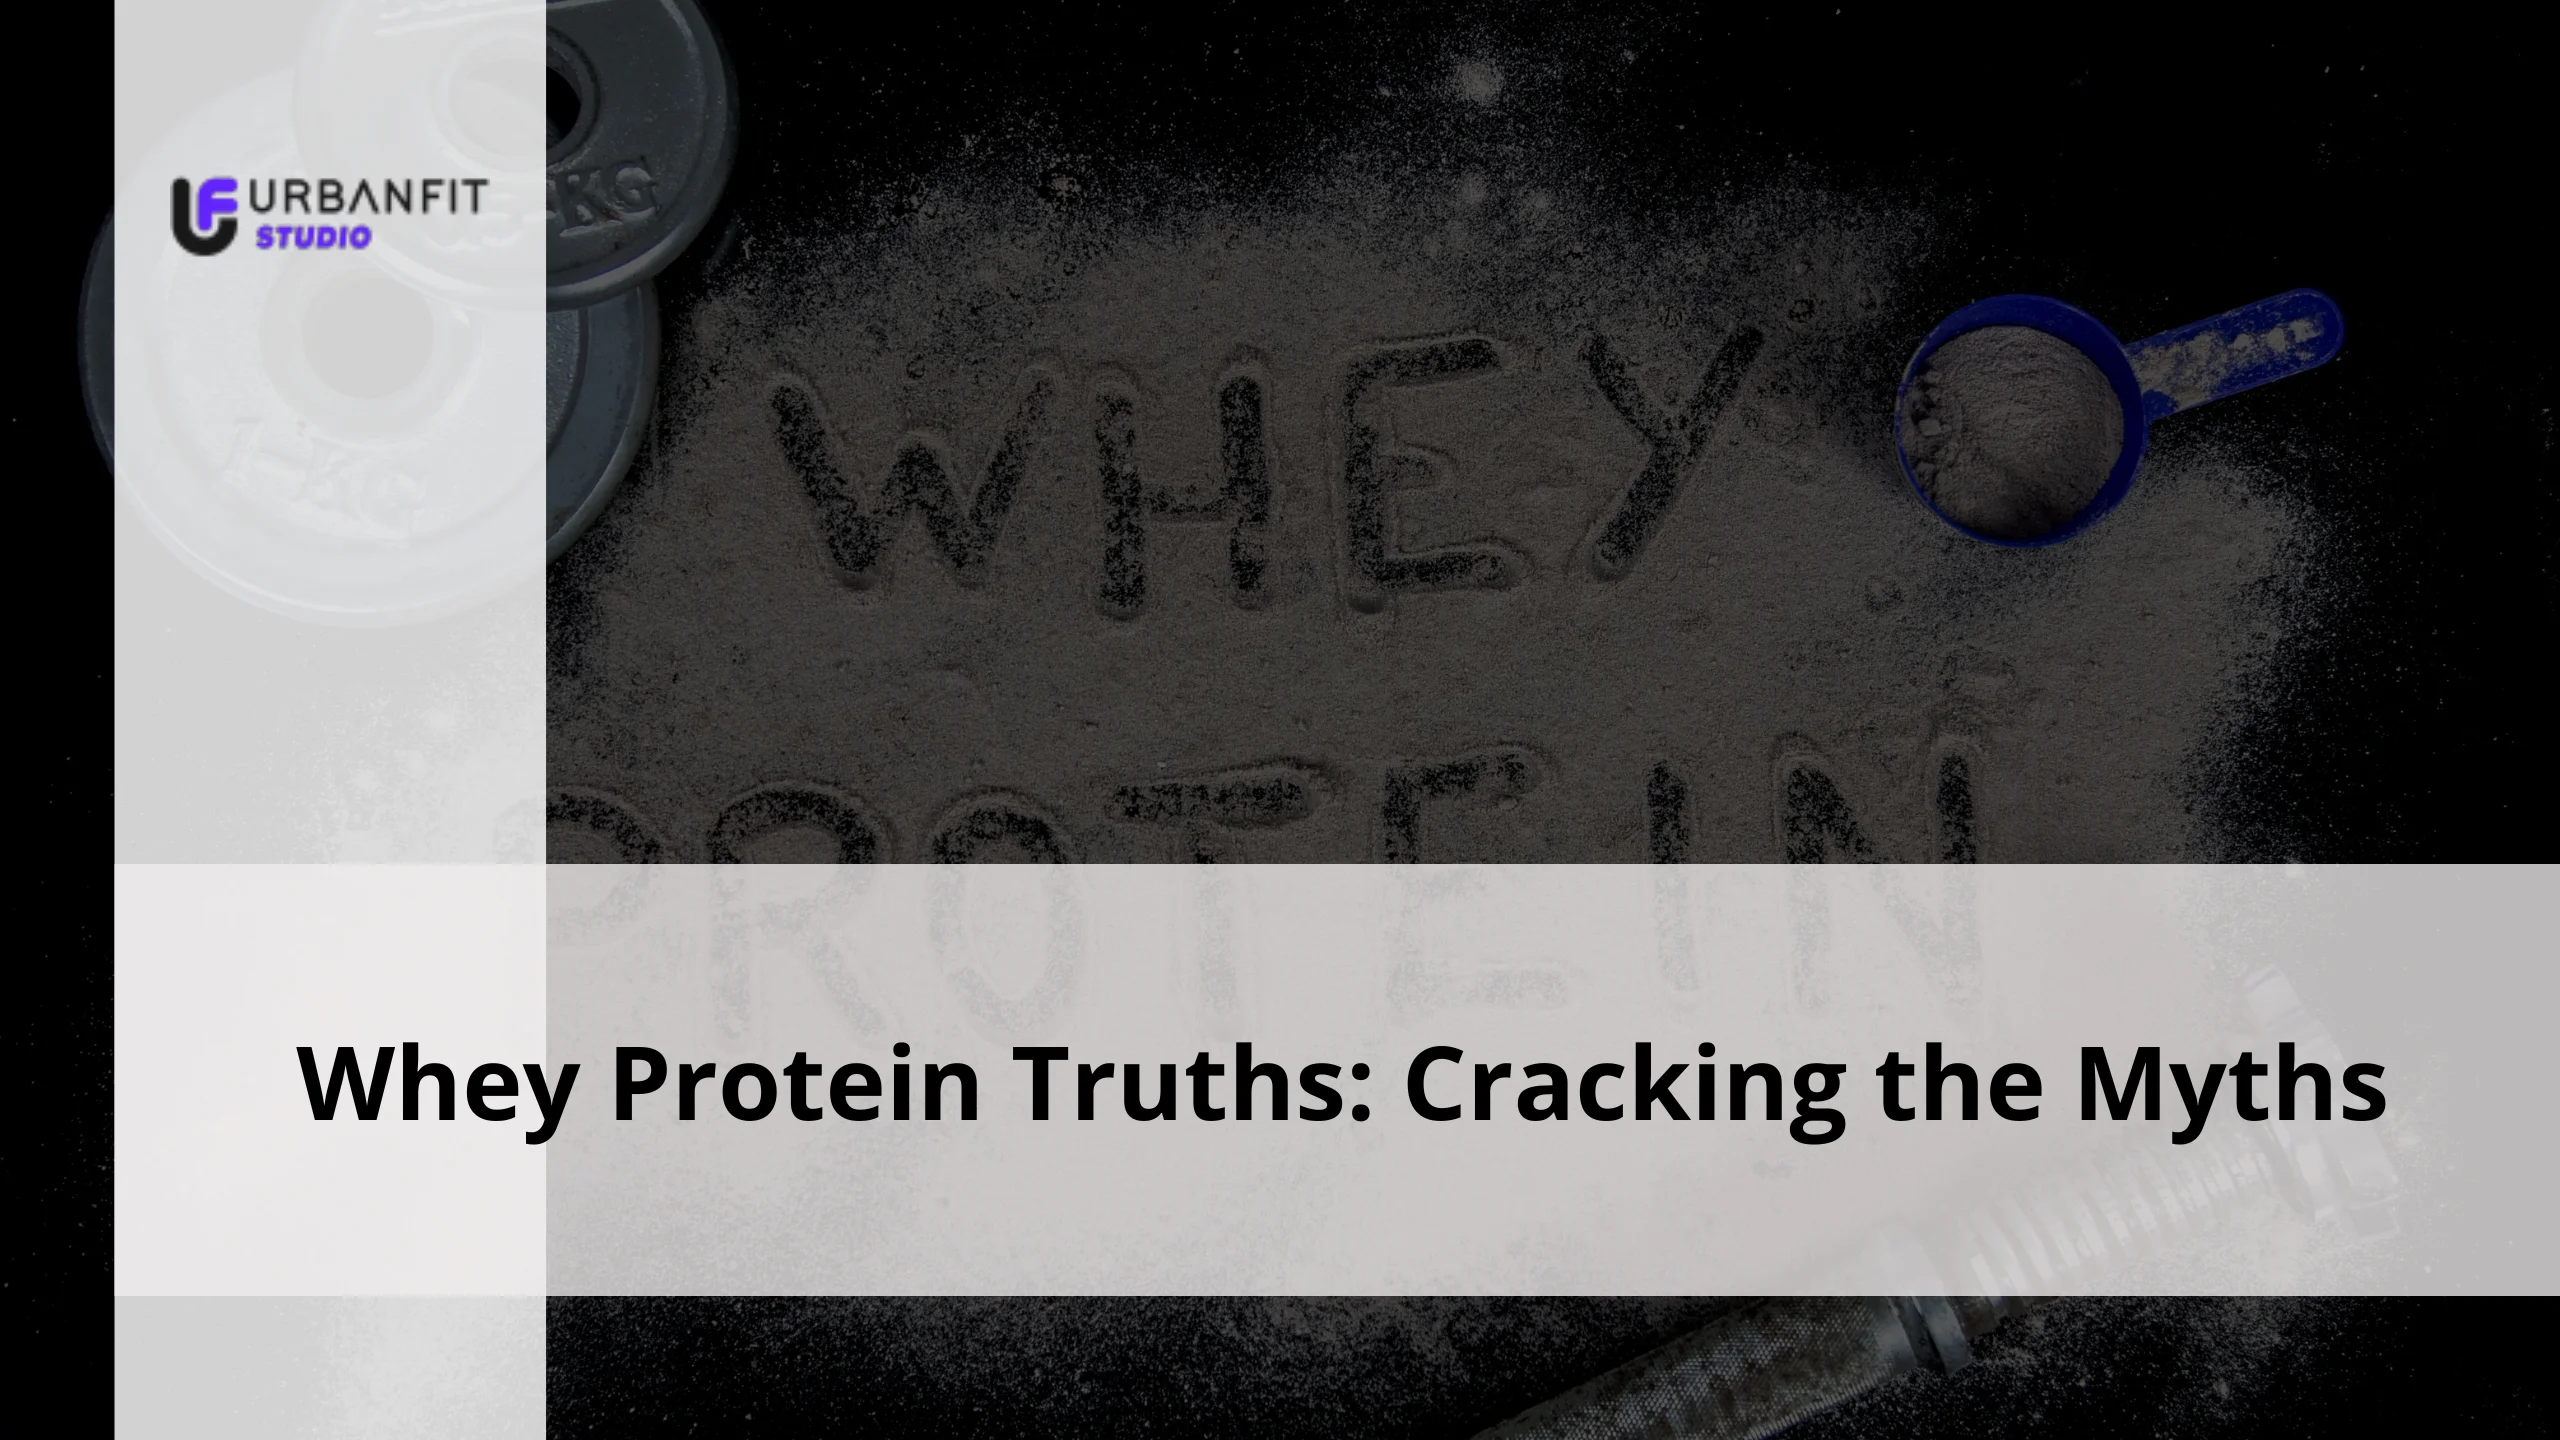 Whey Protein Truths: Cracking the Myths 